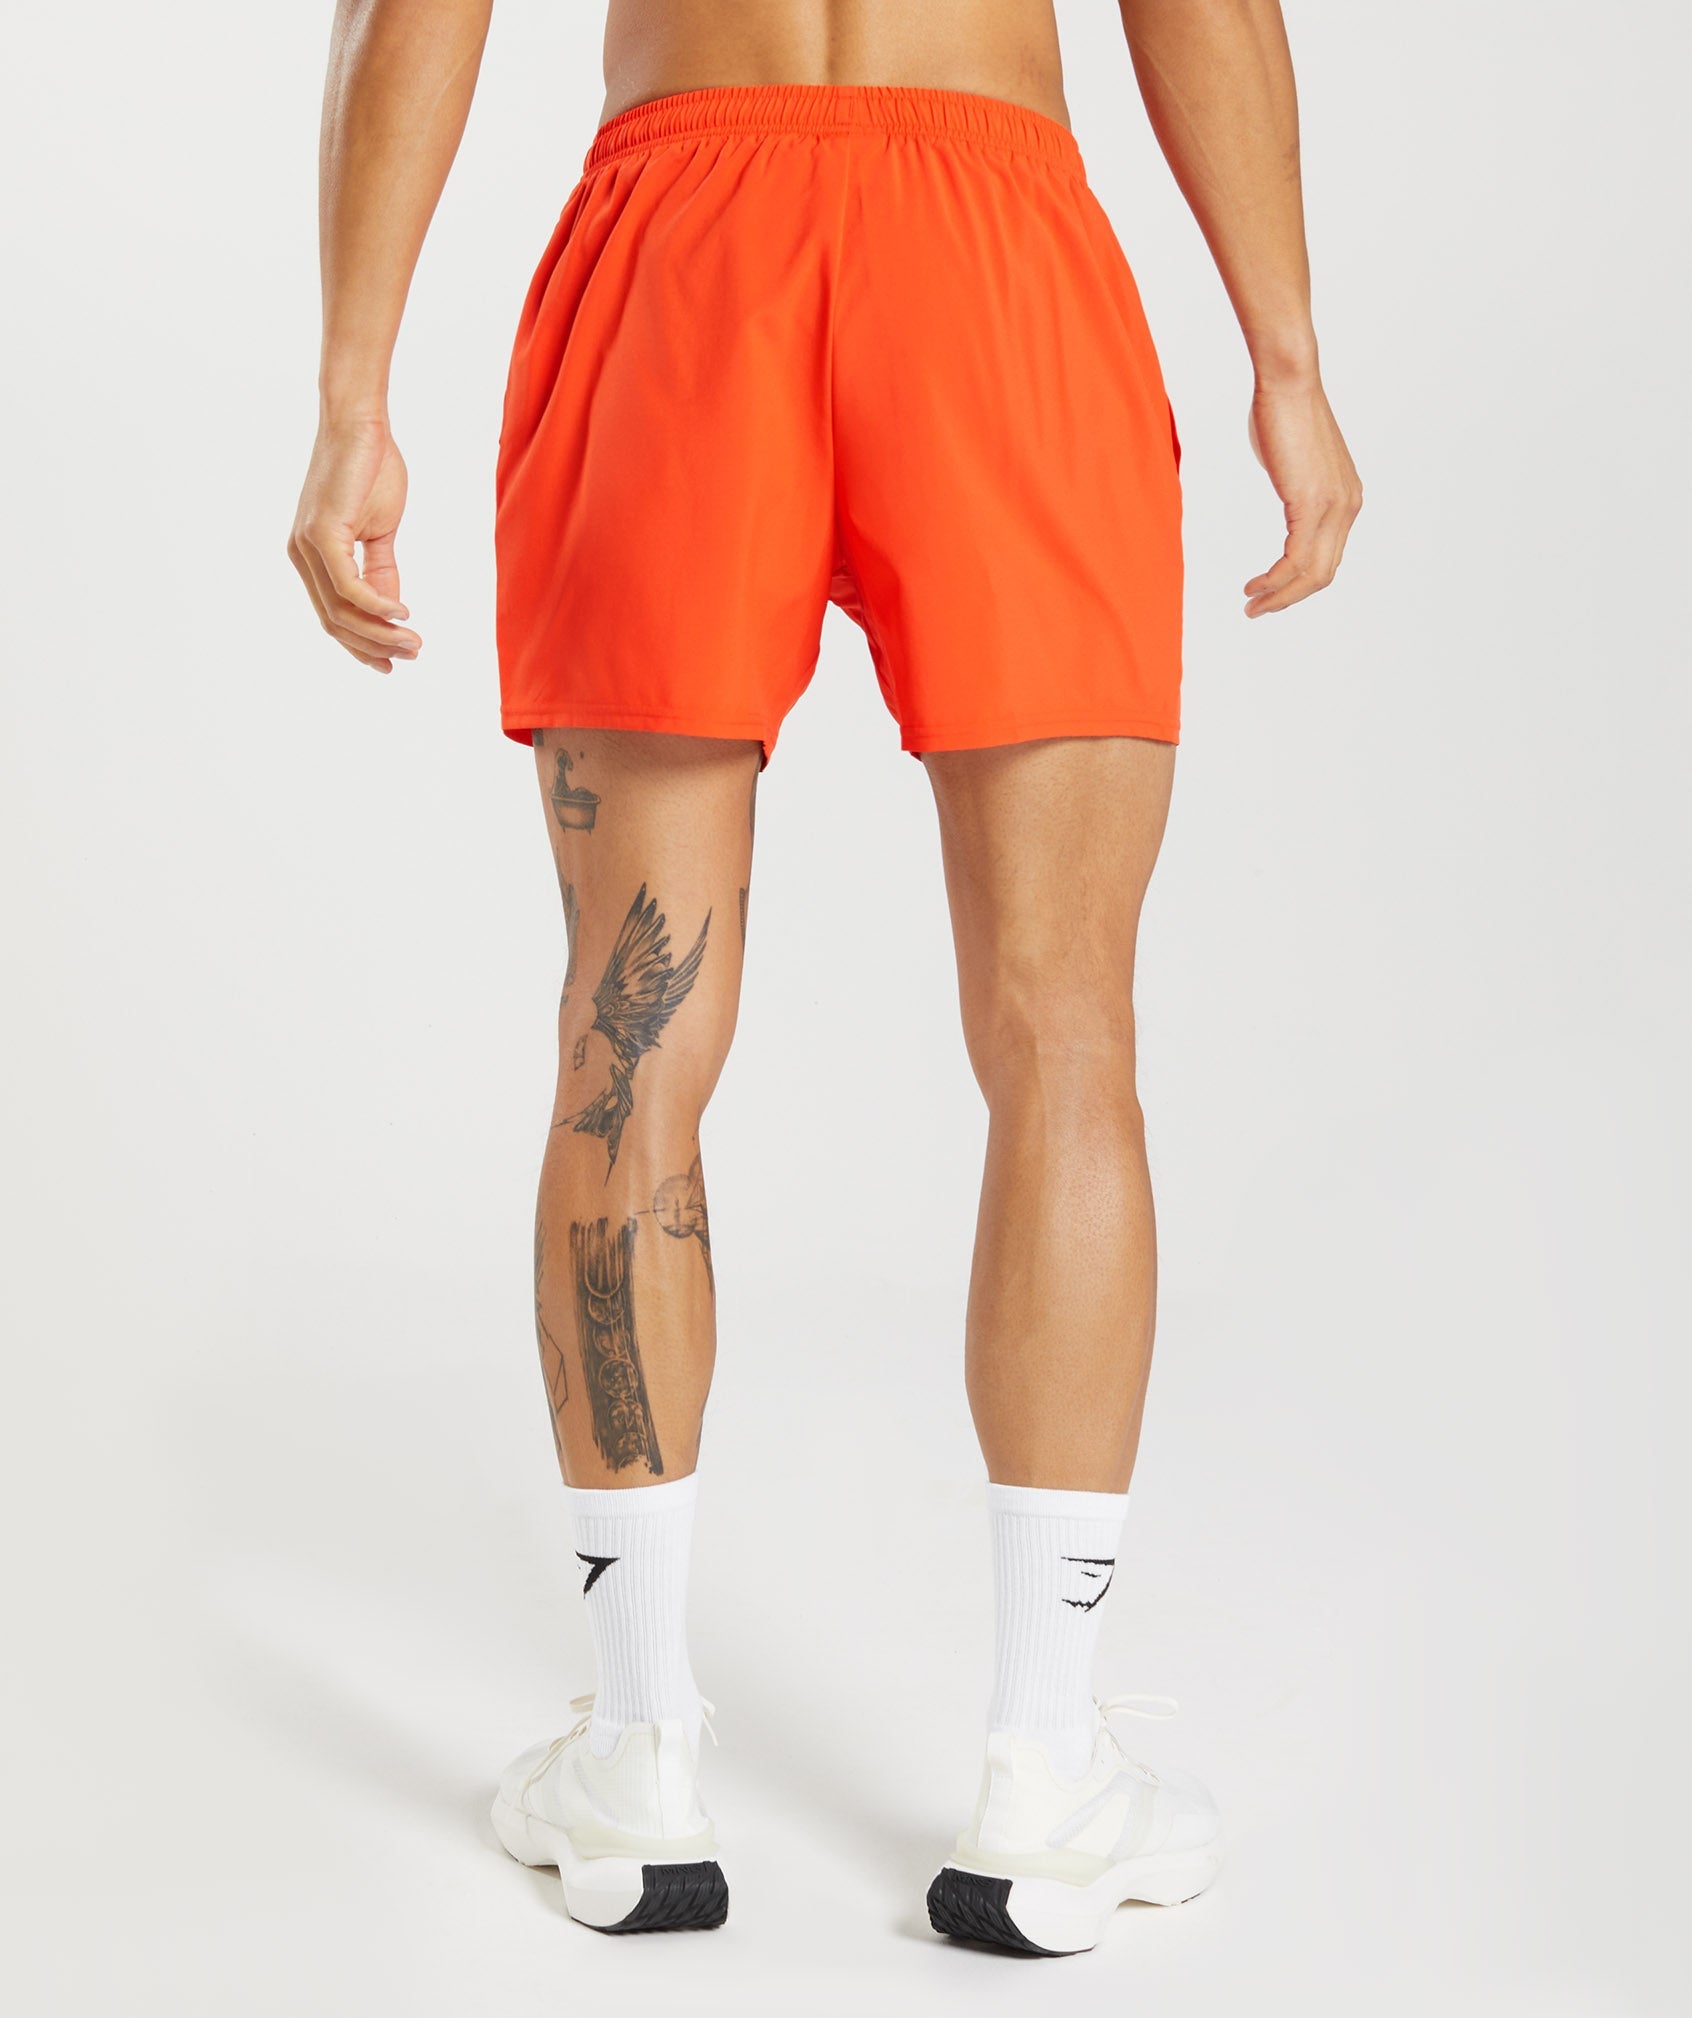 Arrival 5" Shorts in Pepper Red - view 2